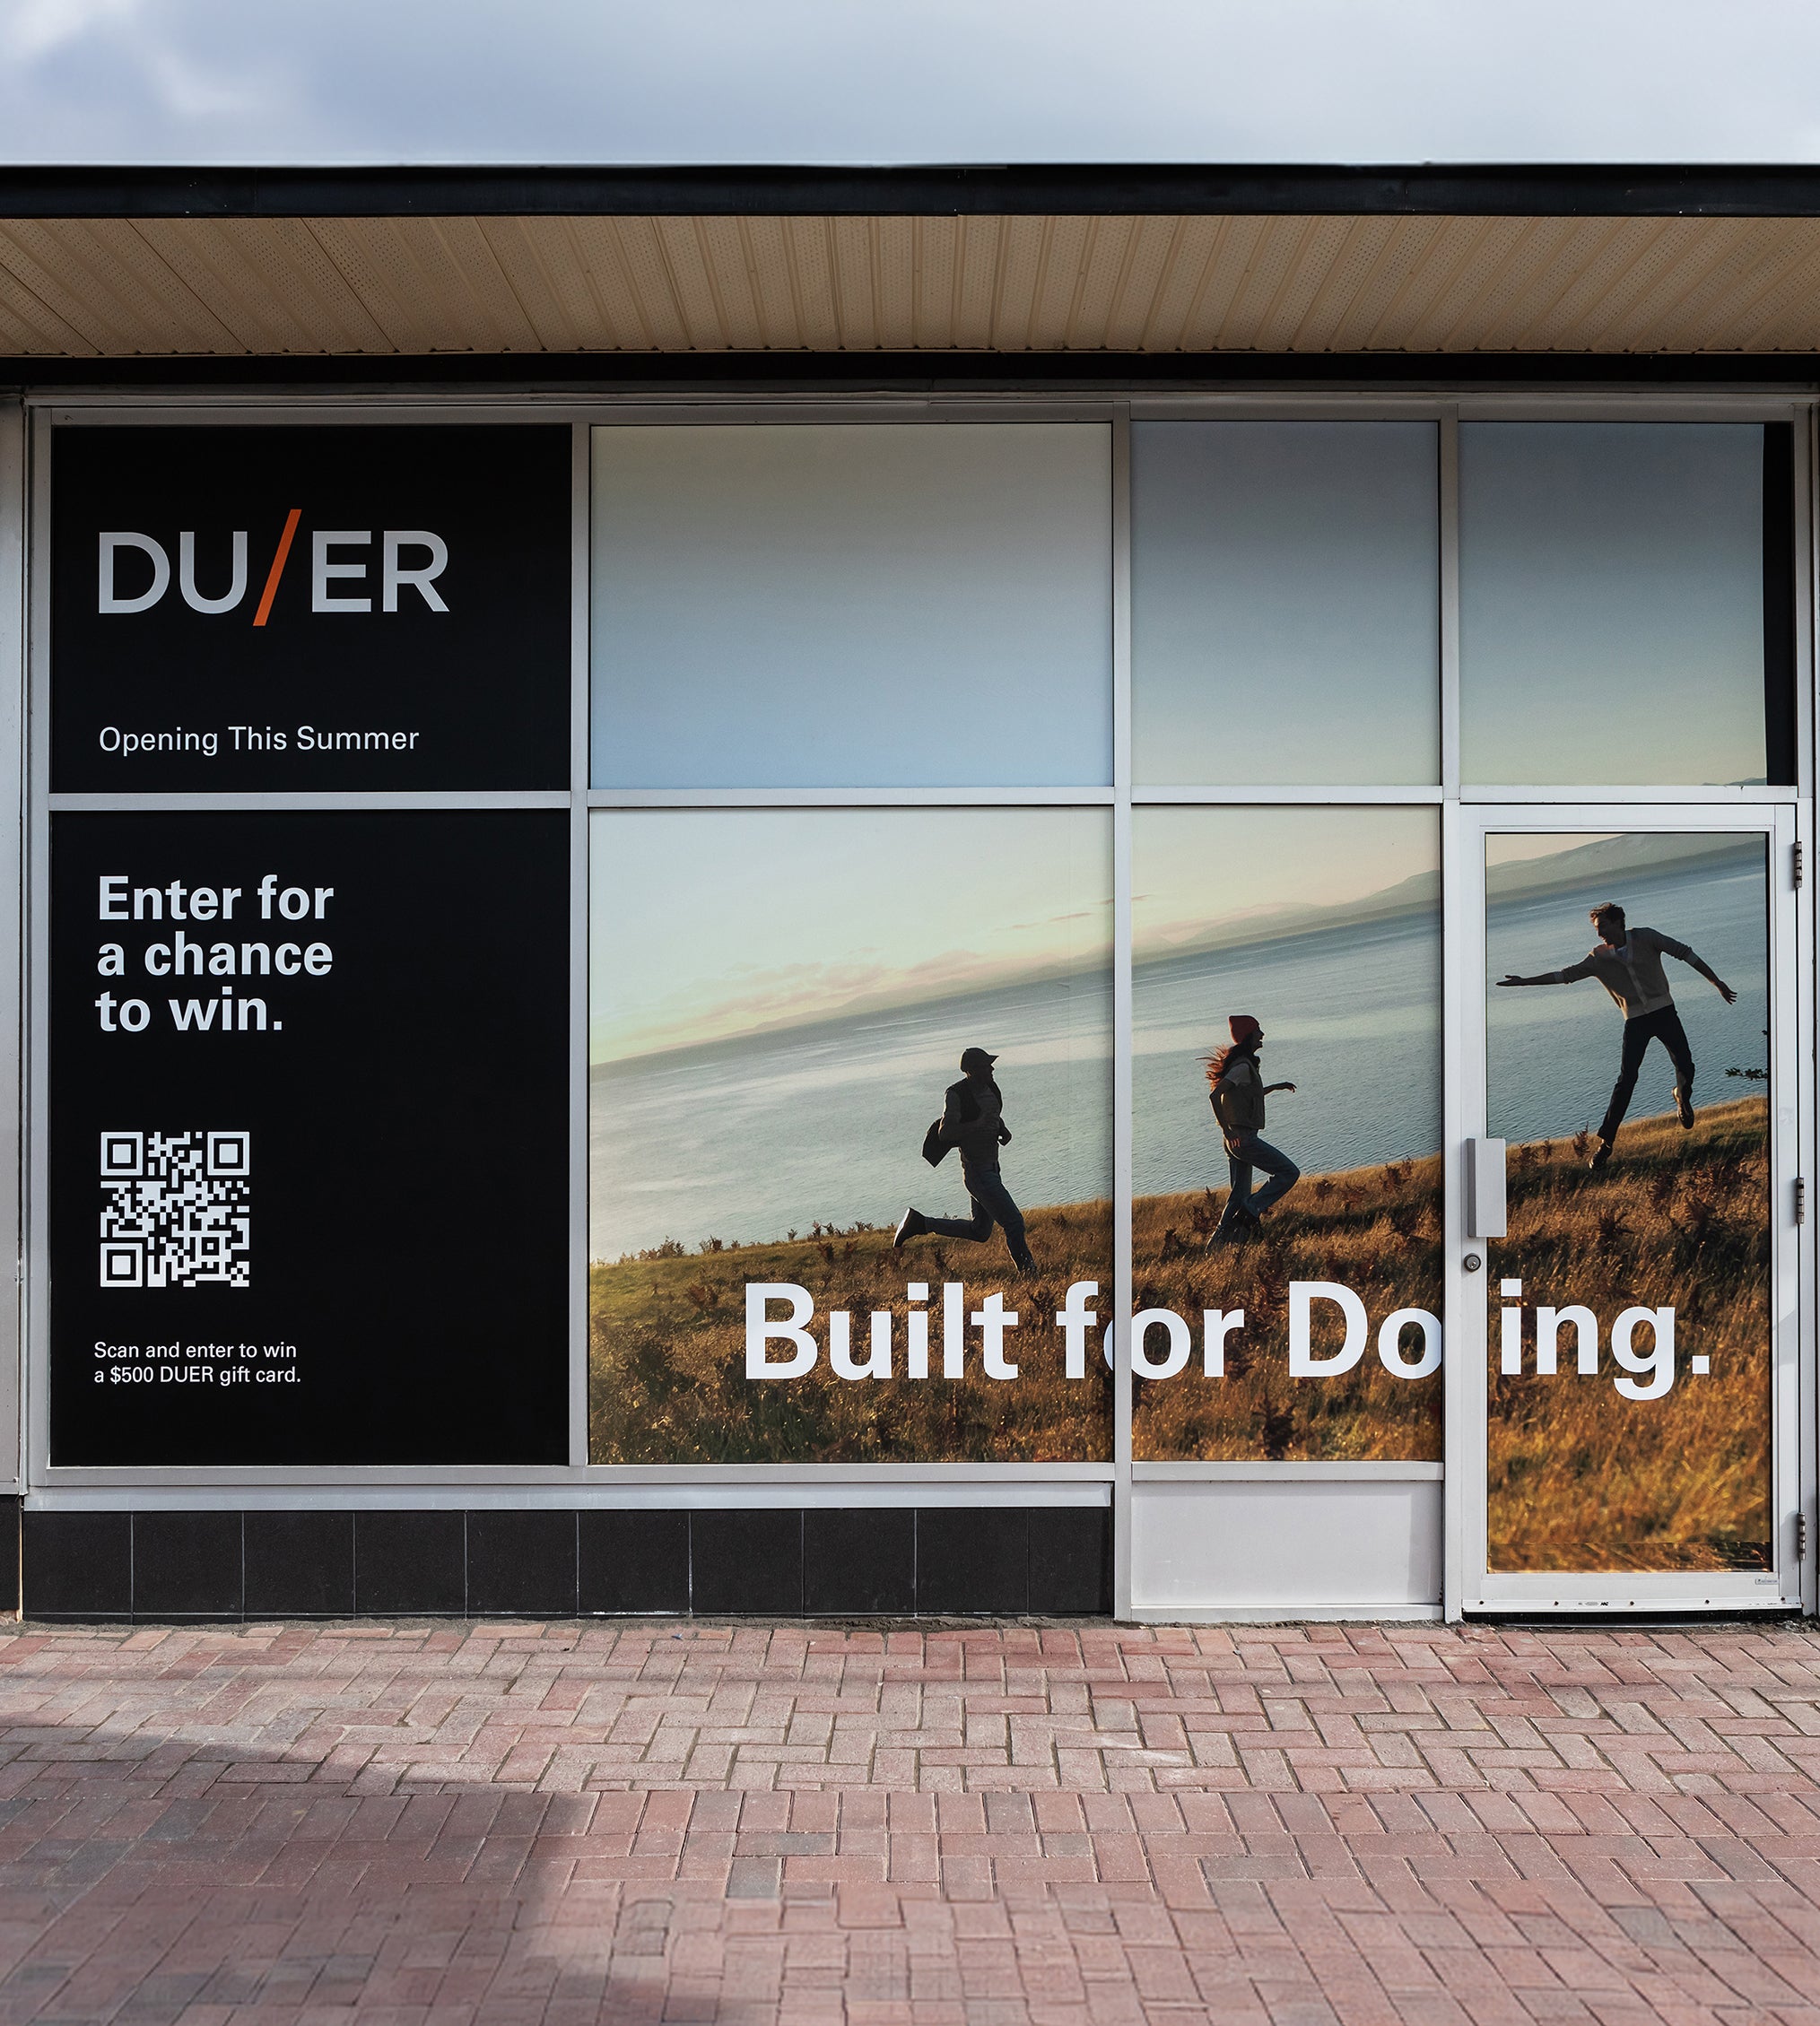 Storefront of DU/ER with promotional banners featuring people jogging by the seaside